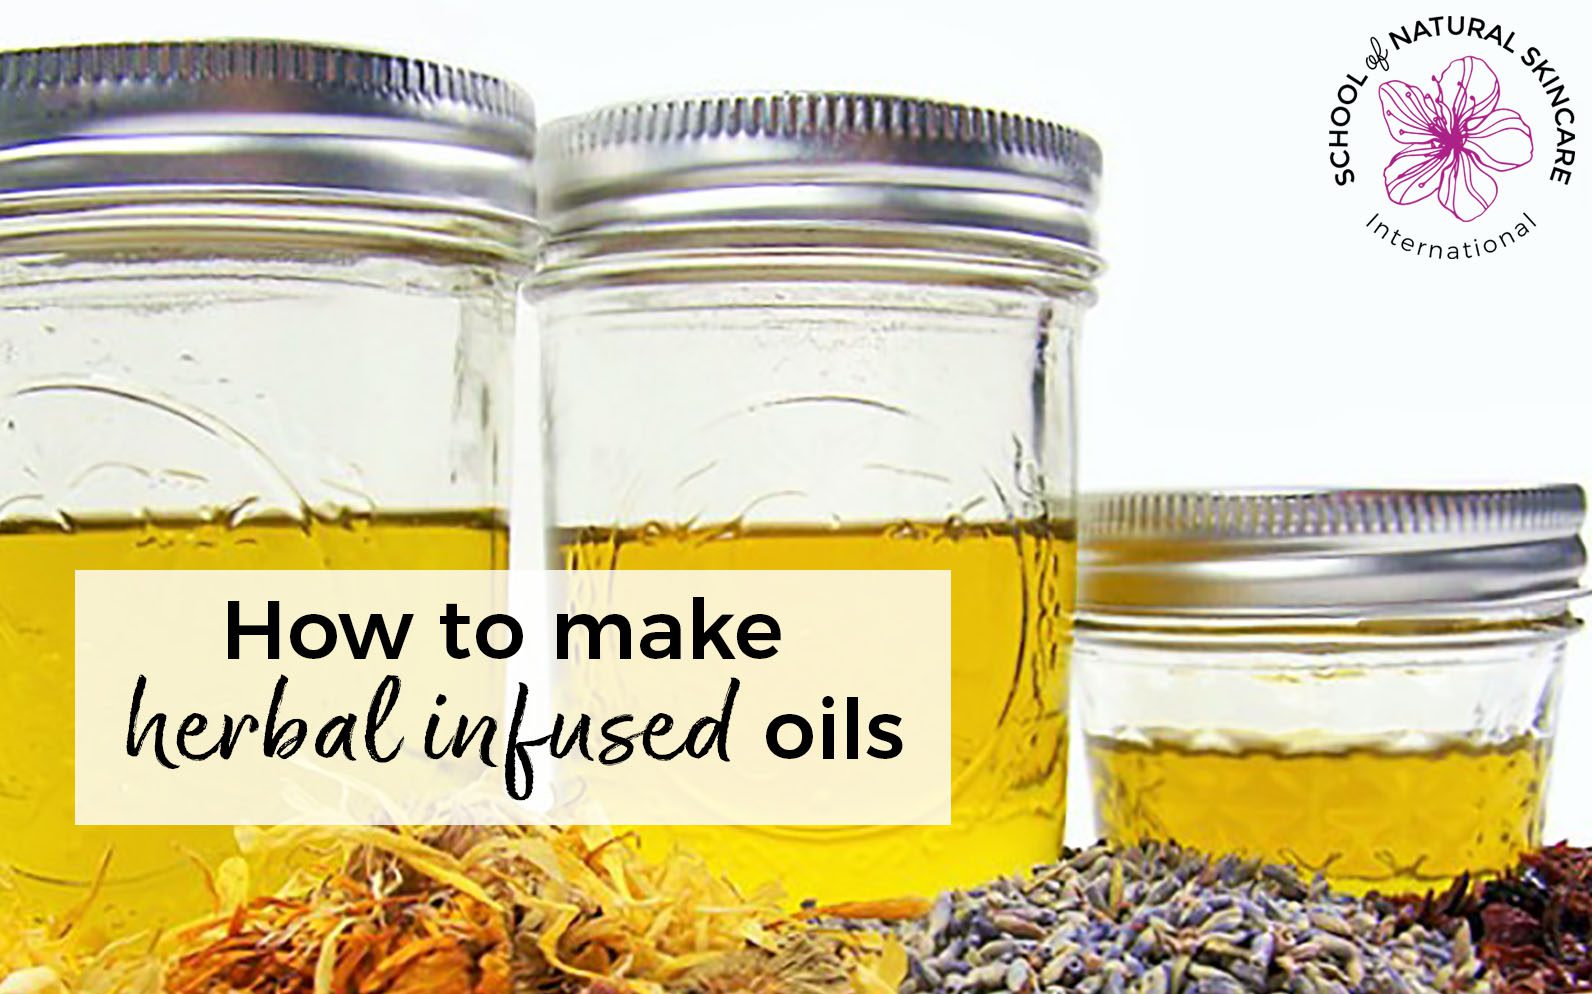 How To Make Herbal Infused Oils School Of Natural Skincare